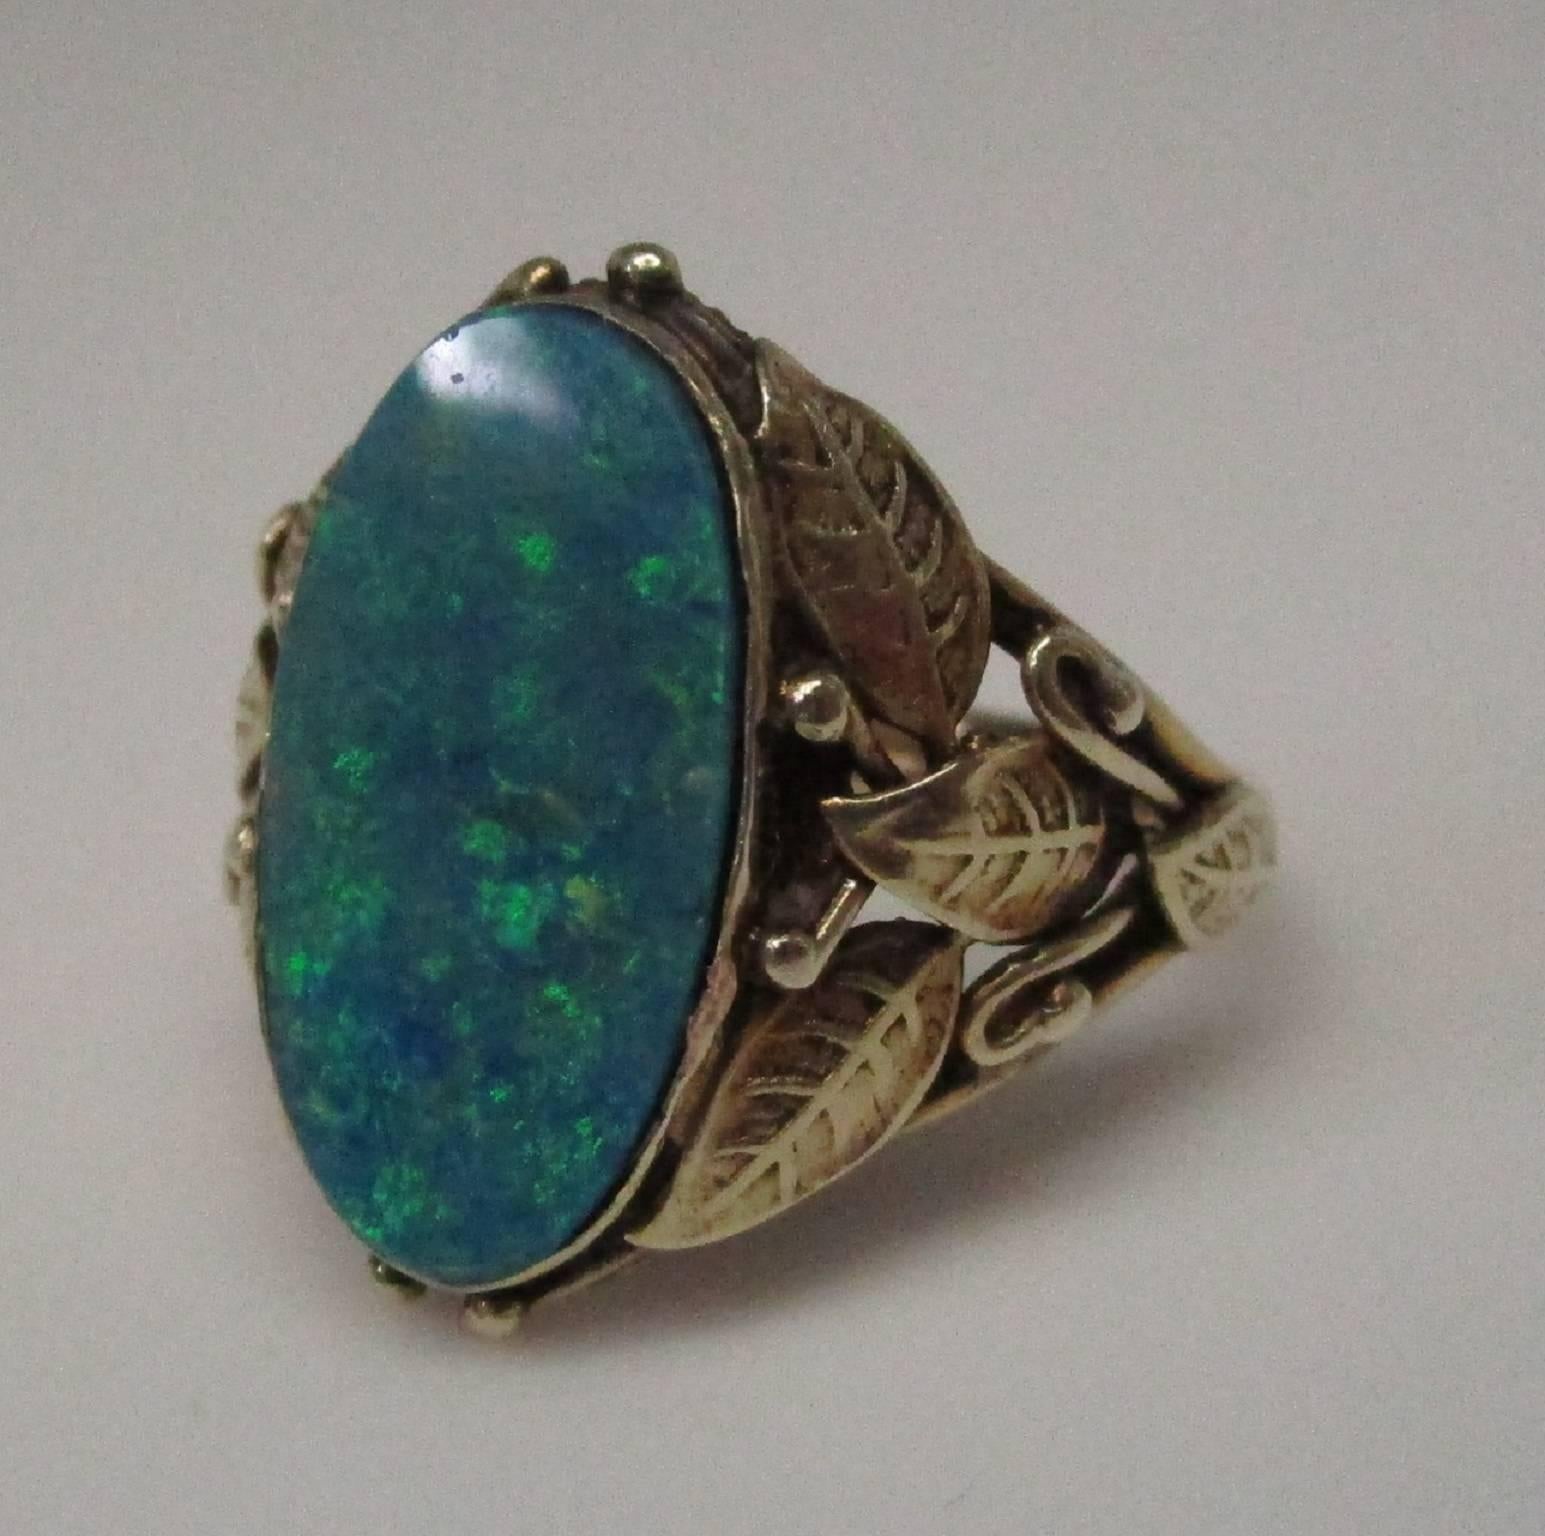 3.0 carat Boulder Black Opal set in Arts & Crafts ring in 14K yellow gold 
Exceptional shoulders with leaf design! Lovely opal - no dead zones, lots of blue and green fire. There is a small chip shown in the photos, it is barely noticeable when just